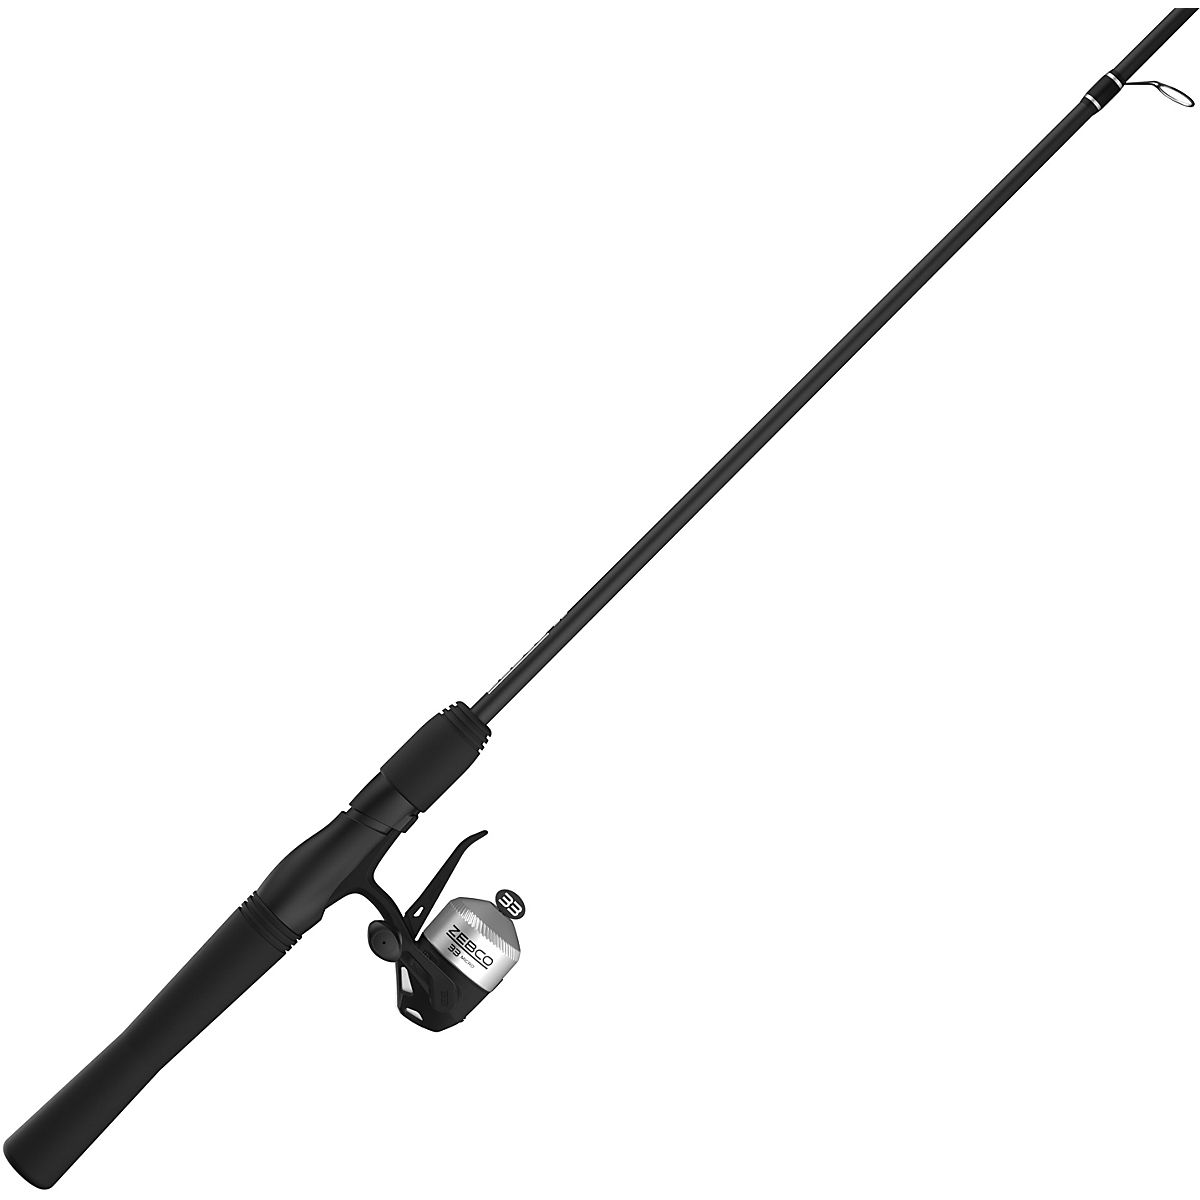 5 Fishing Rods Incl Zebco 33